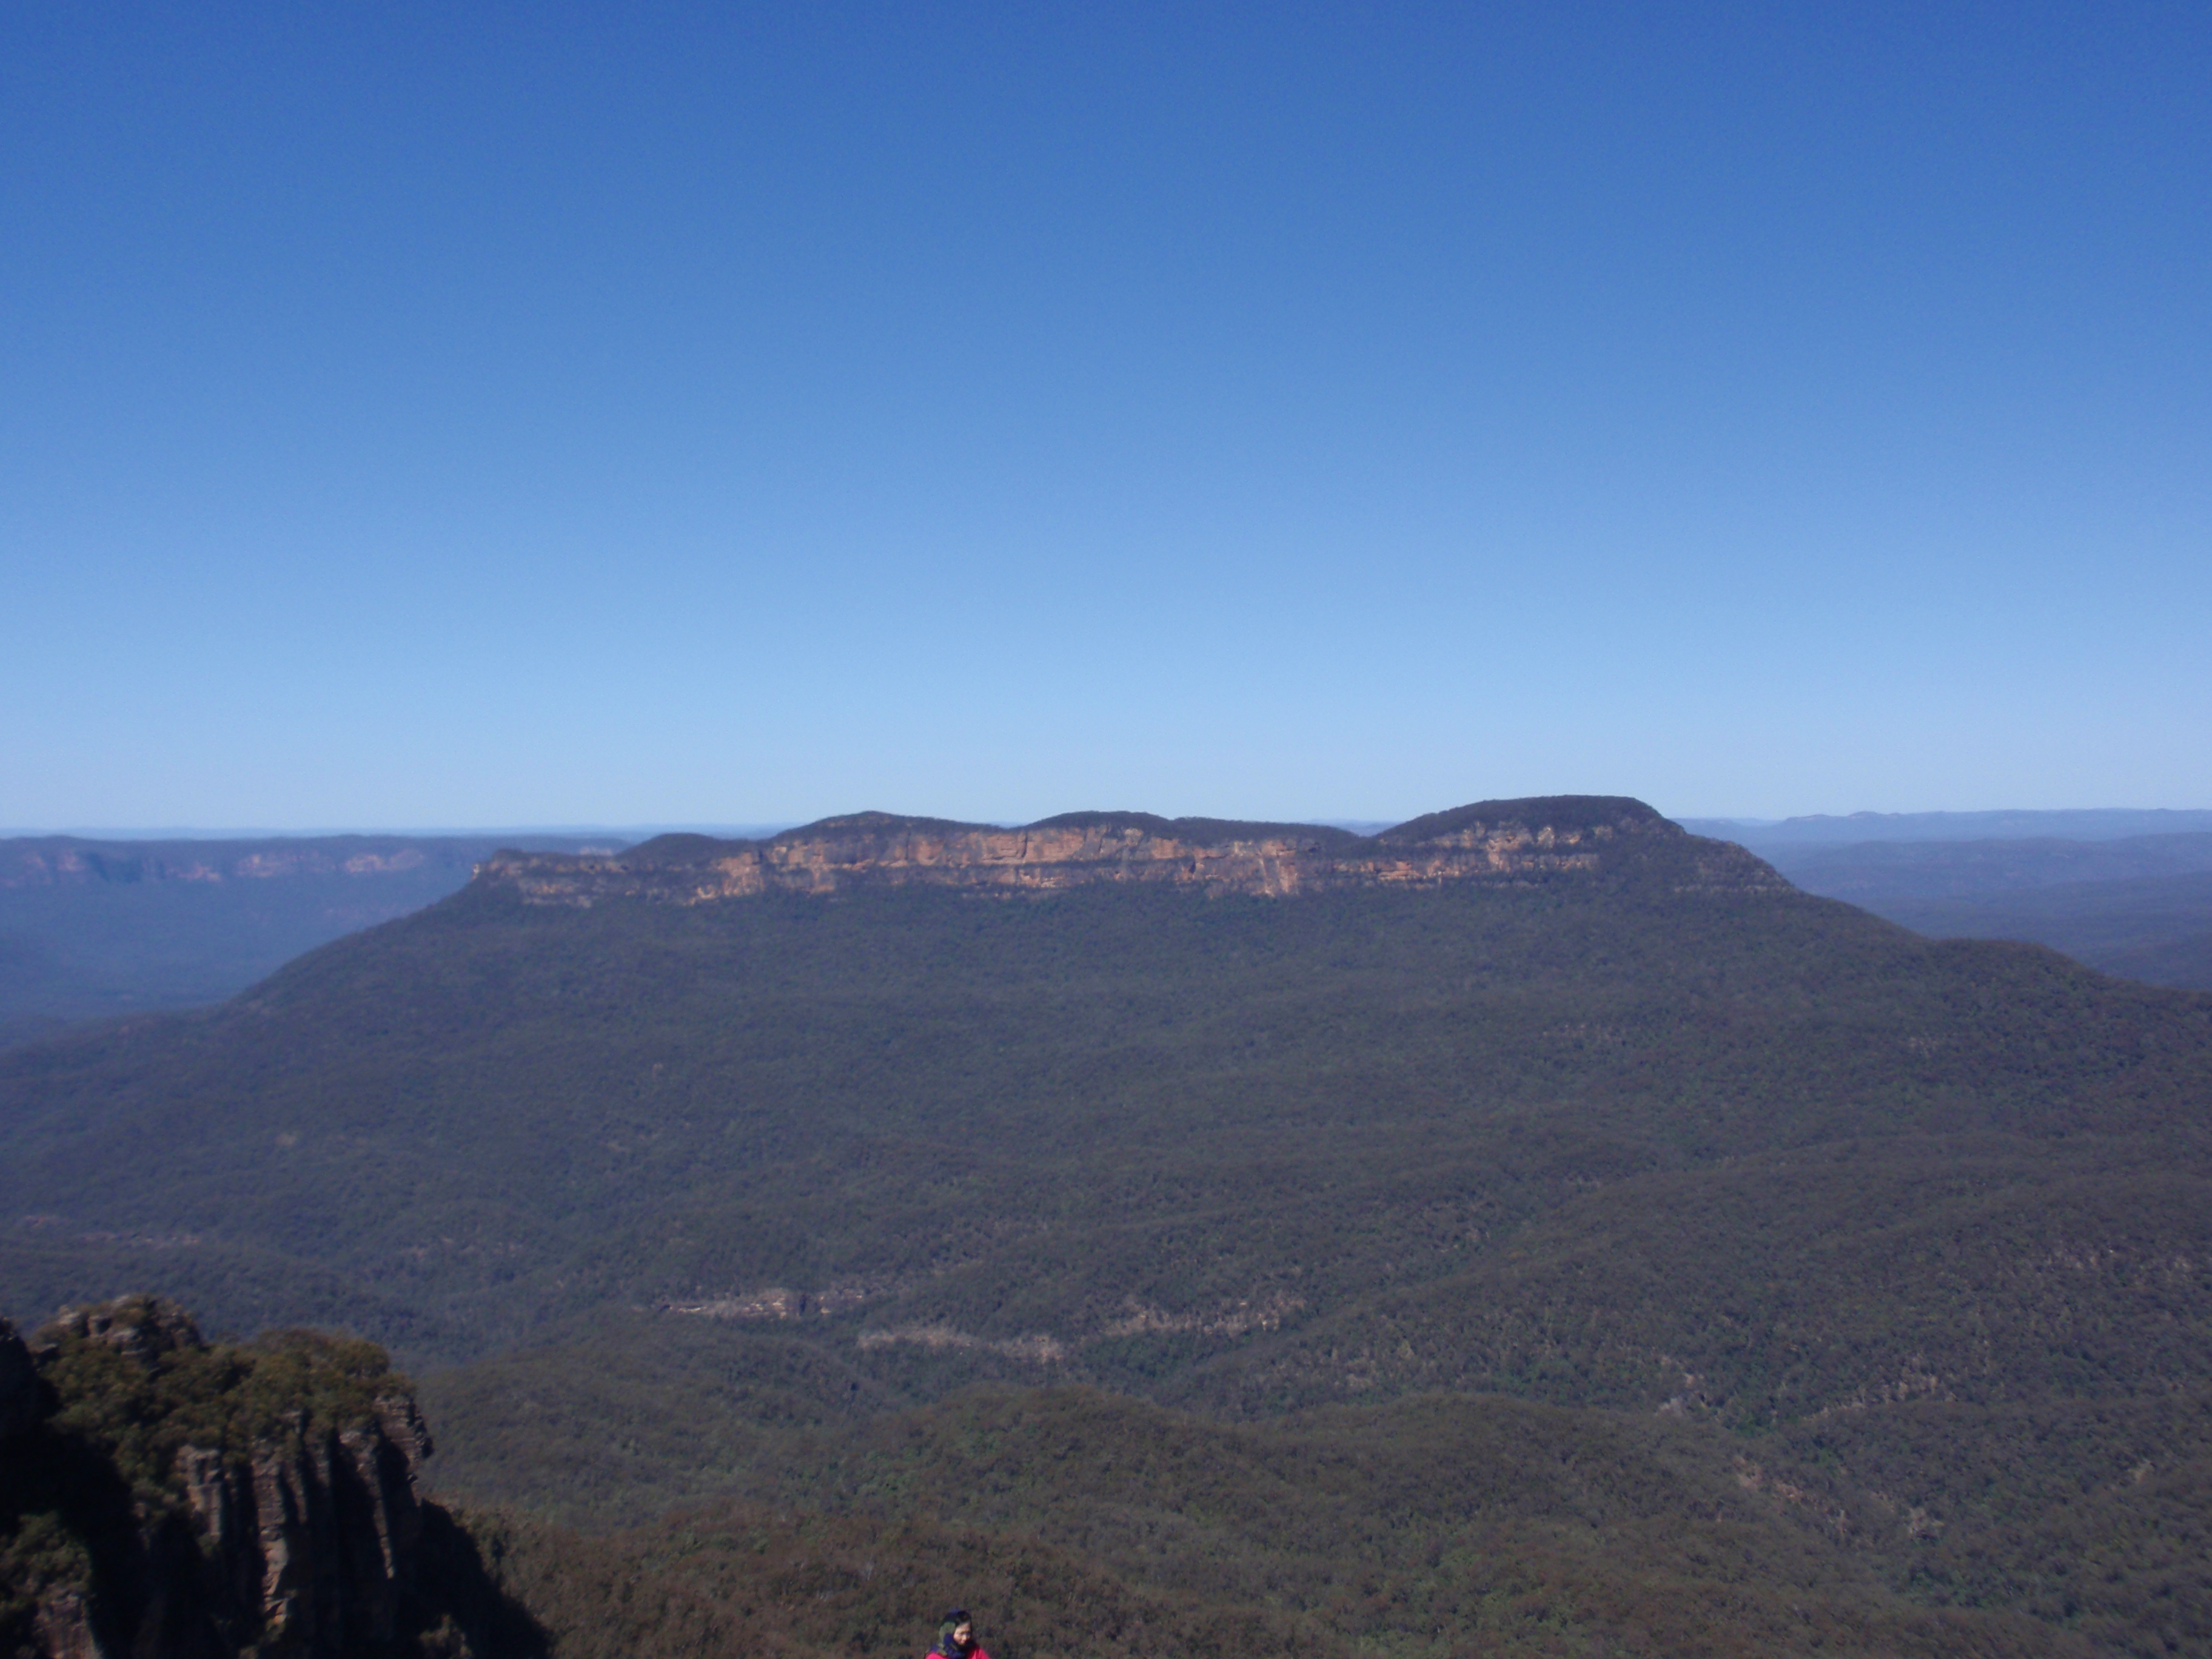 "The greenest of the Blue Mountains."